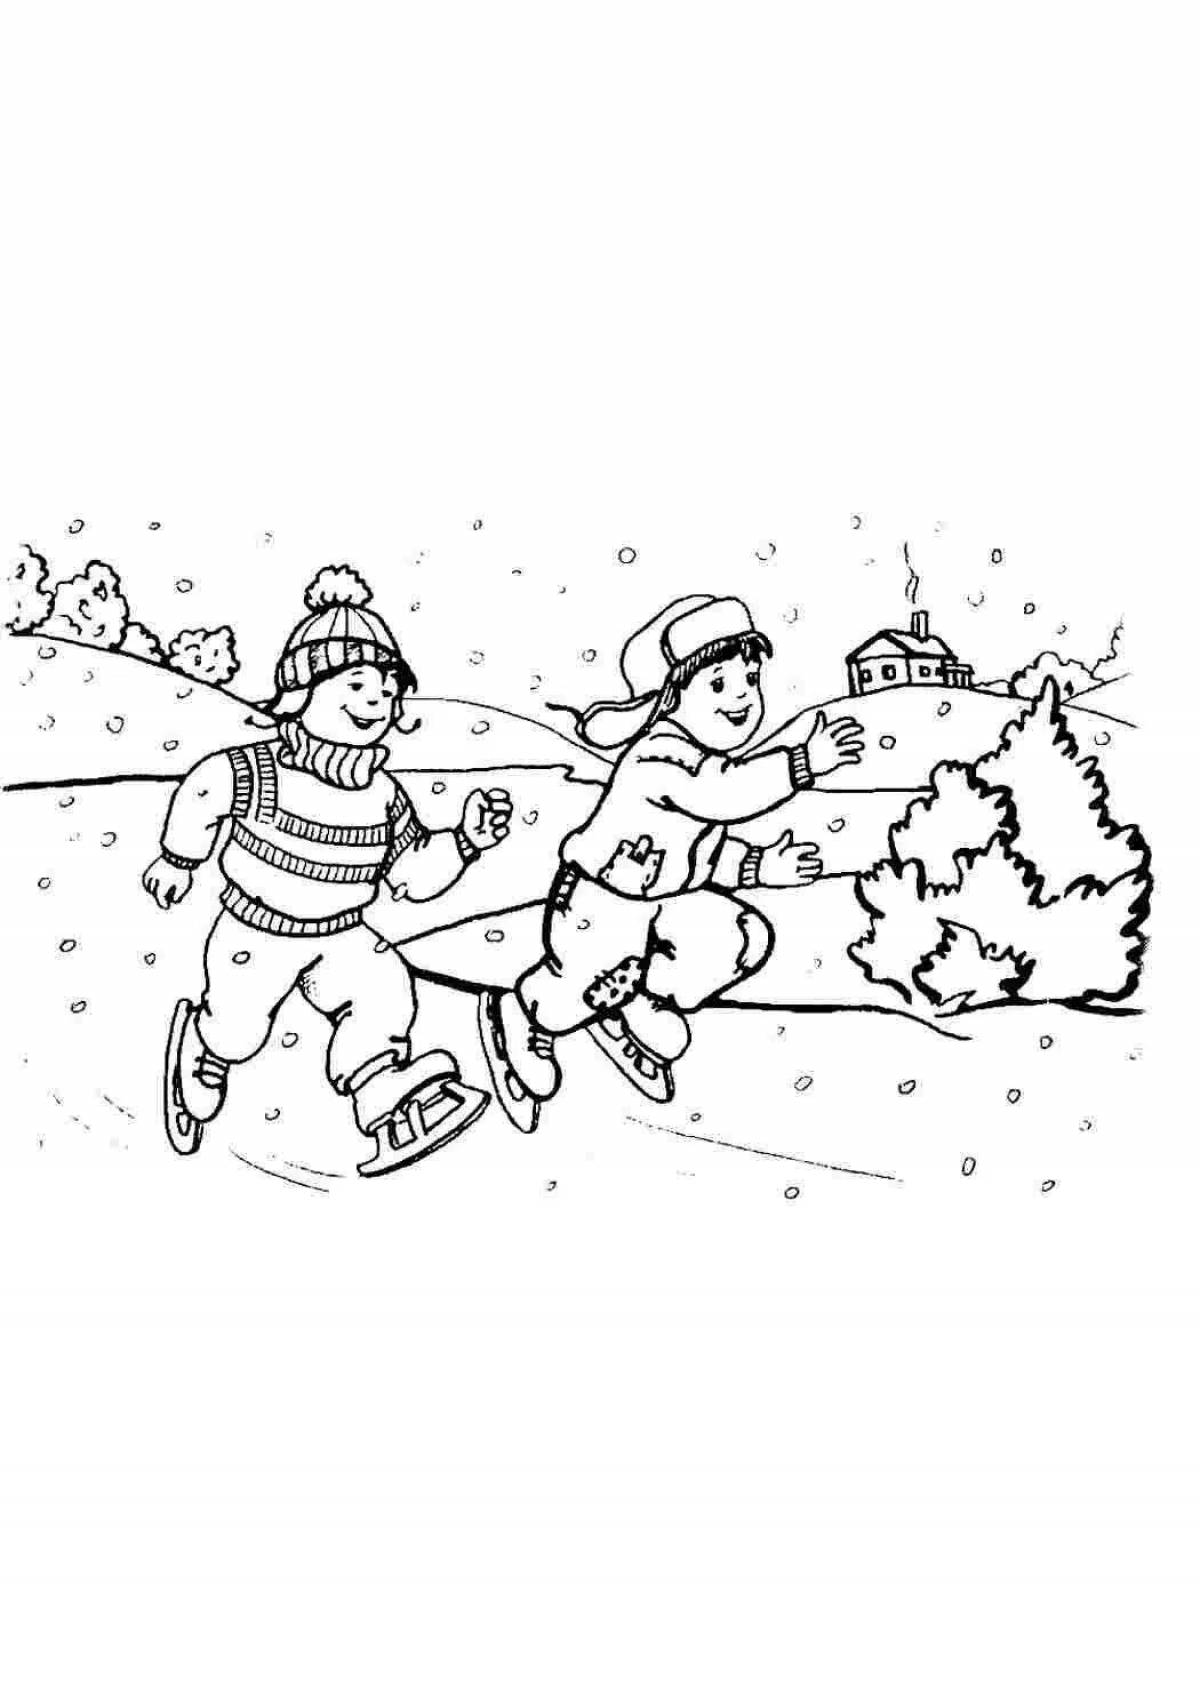 Animated winter holidays coloring book for kids